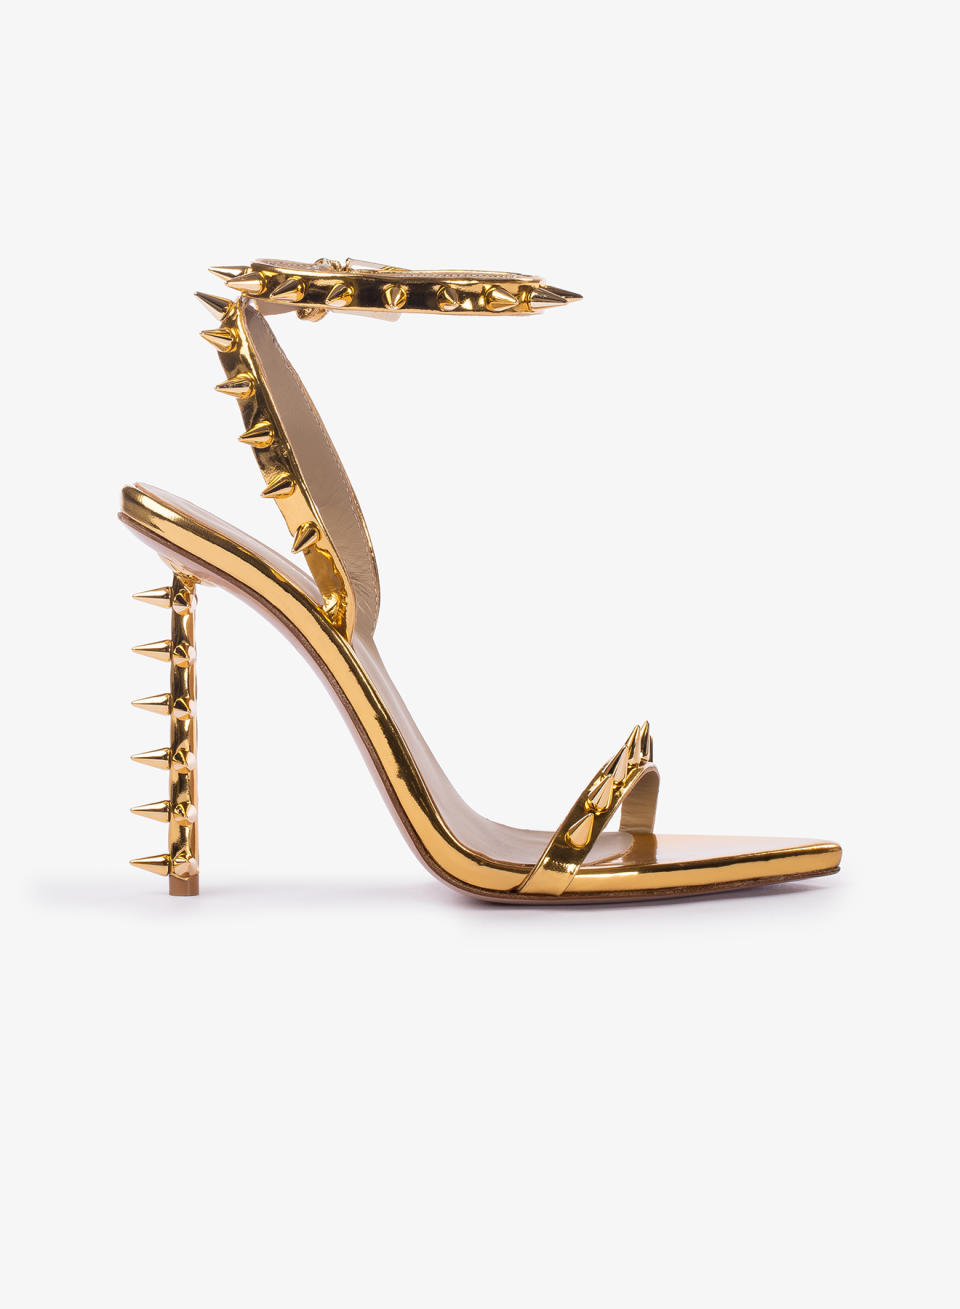 A spiked stiletto from Le Silla for fall winter ’23. - Credit: Courtesy of Le Silla